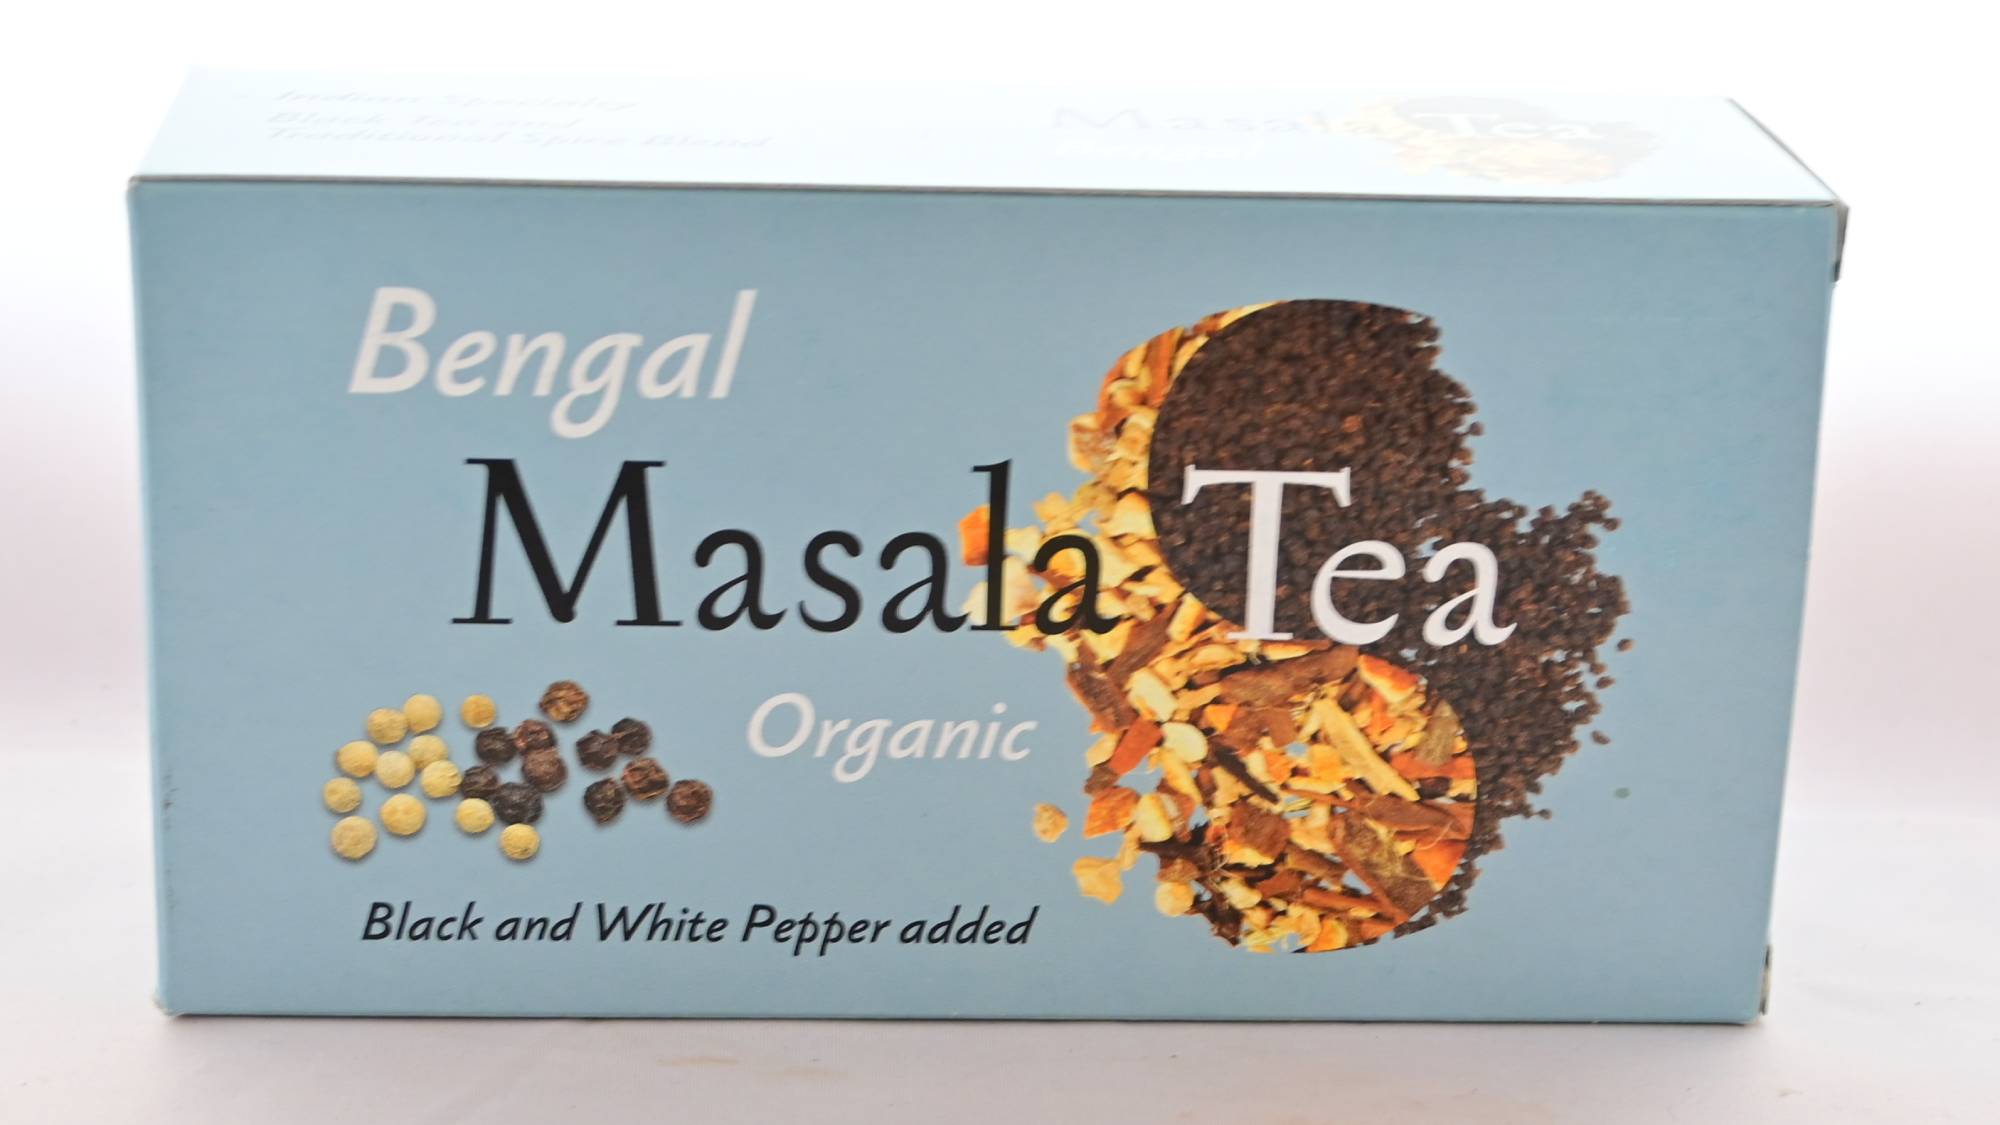 The Bengal Masala Tea box is pastel blue. It features masala spices and rolled black tea together in a yin-yang shape, with black and white peppercorns toward the bottom left. Text reads: "Bengal. Masala Tea. Organic. Black and White Pepper added."